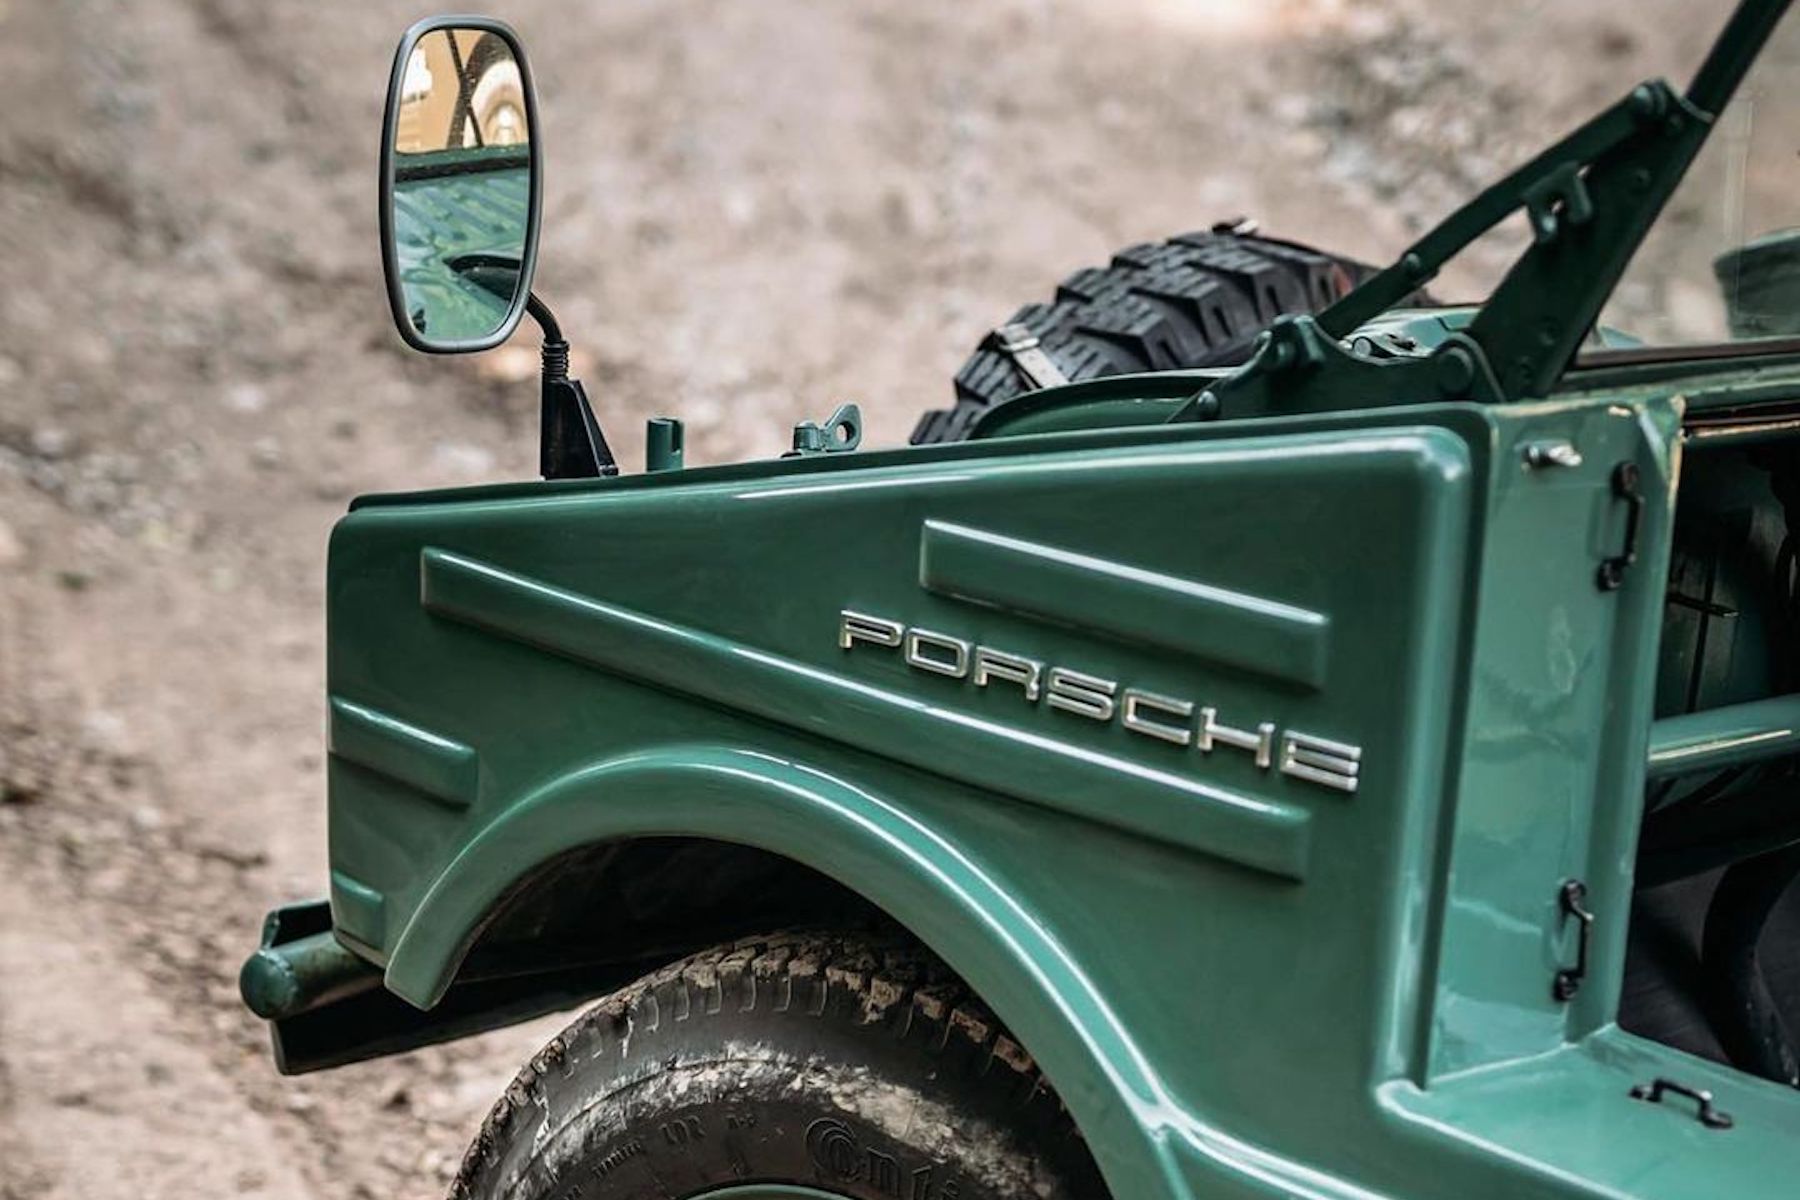 Rare Porsche Jeep You Never Knew Existed Is The Perfect Byron Bay Cruiser